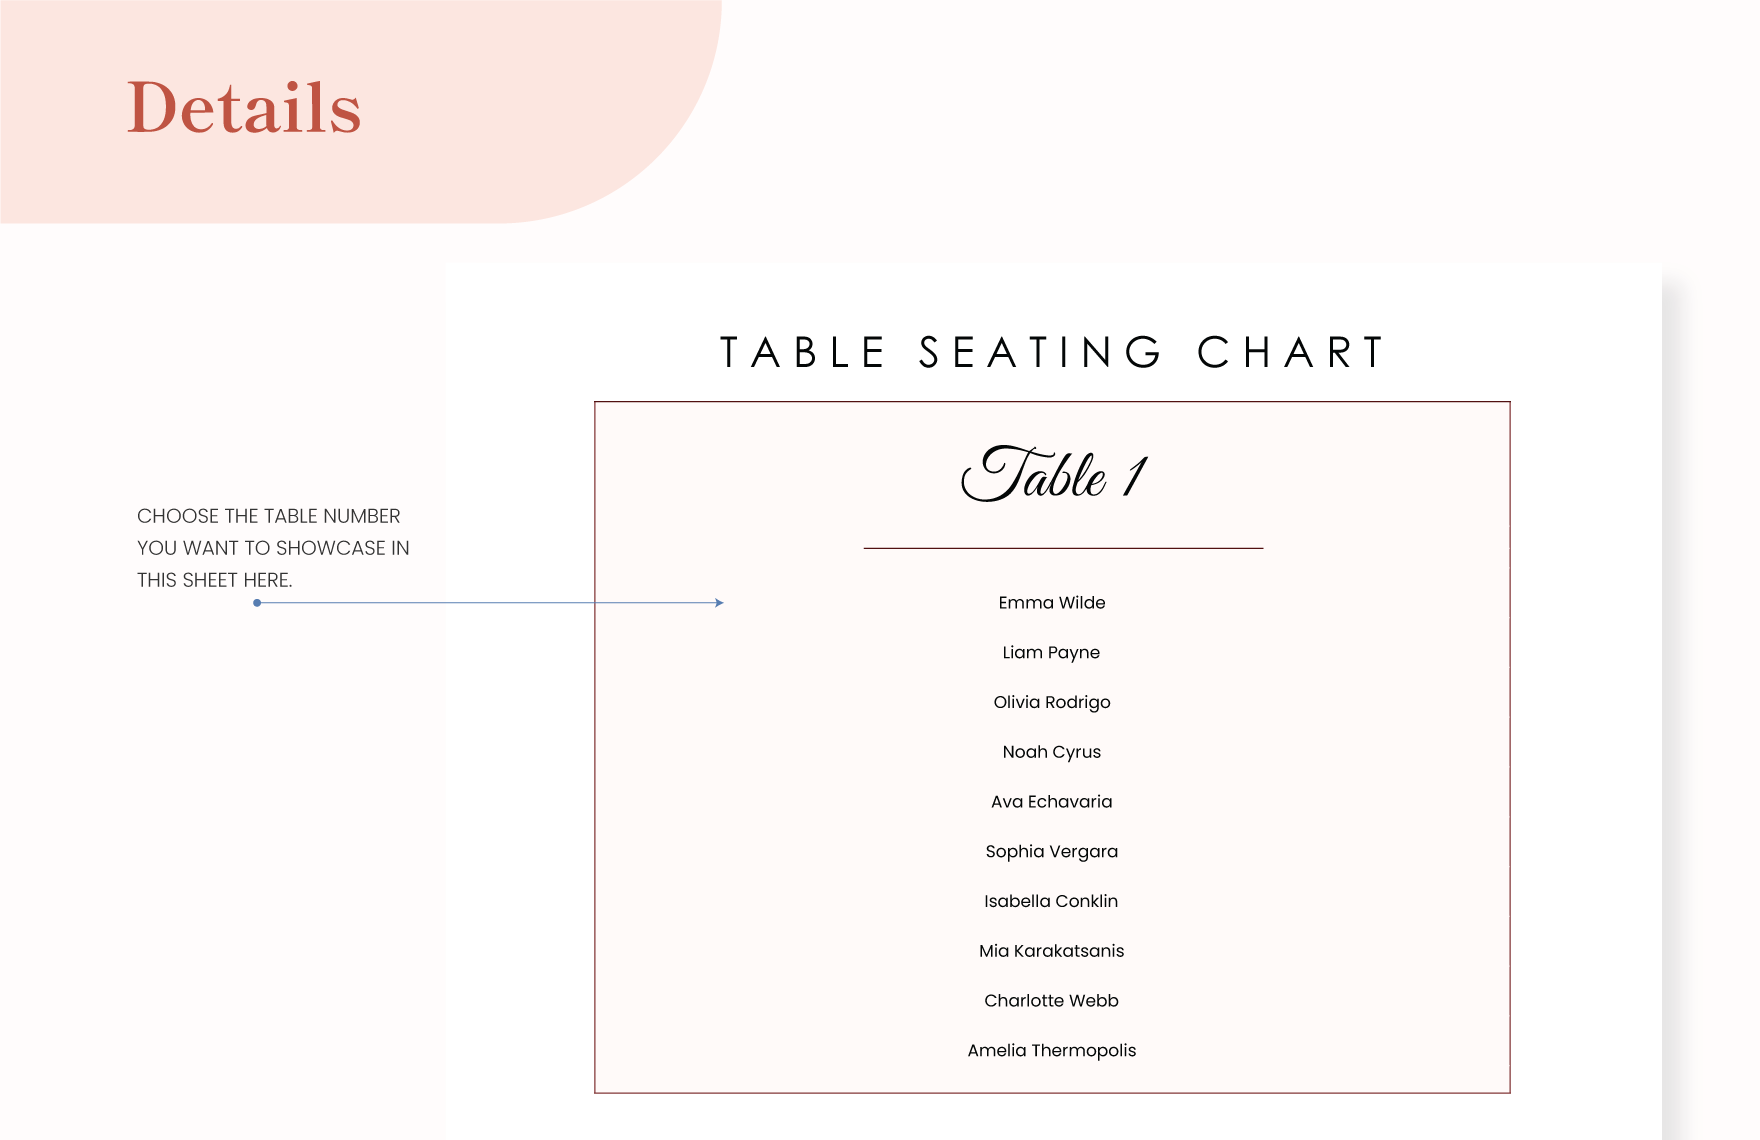 Table Seating Chart Template